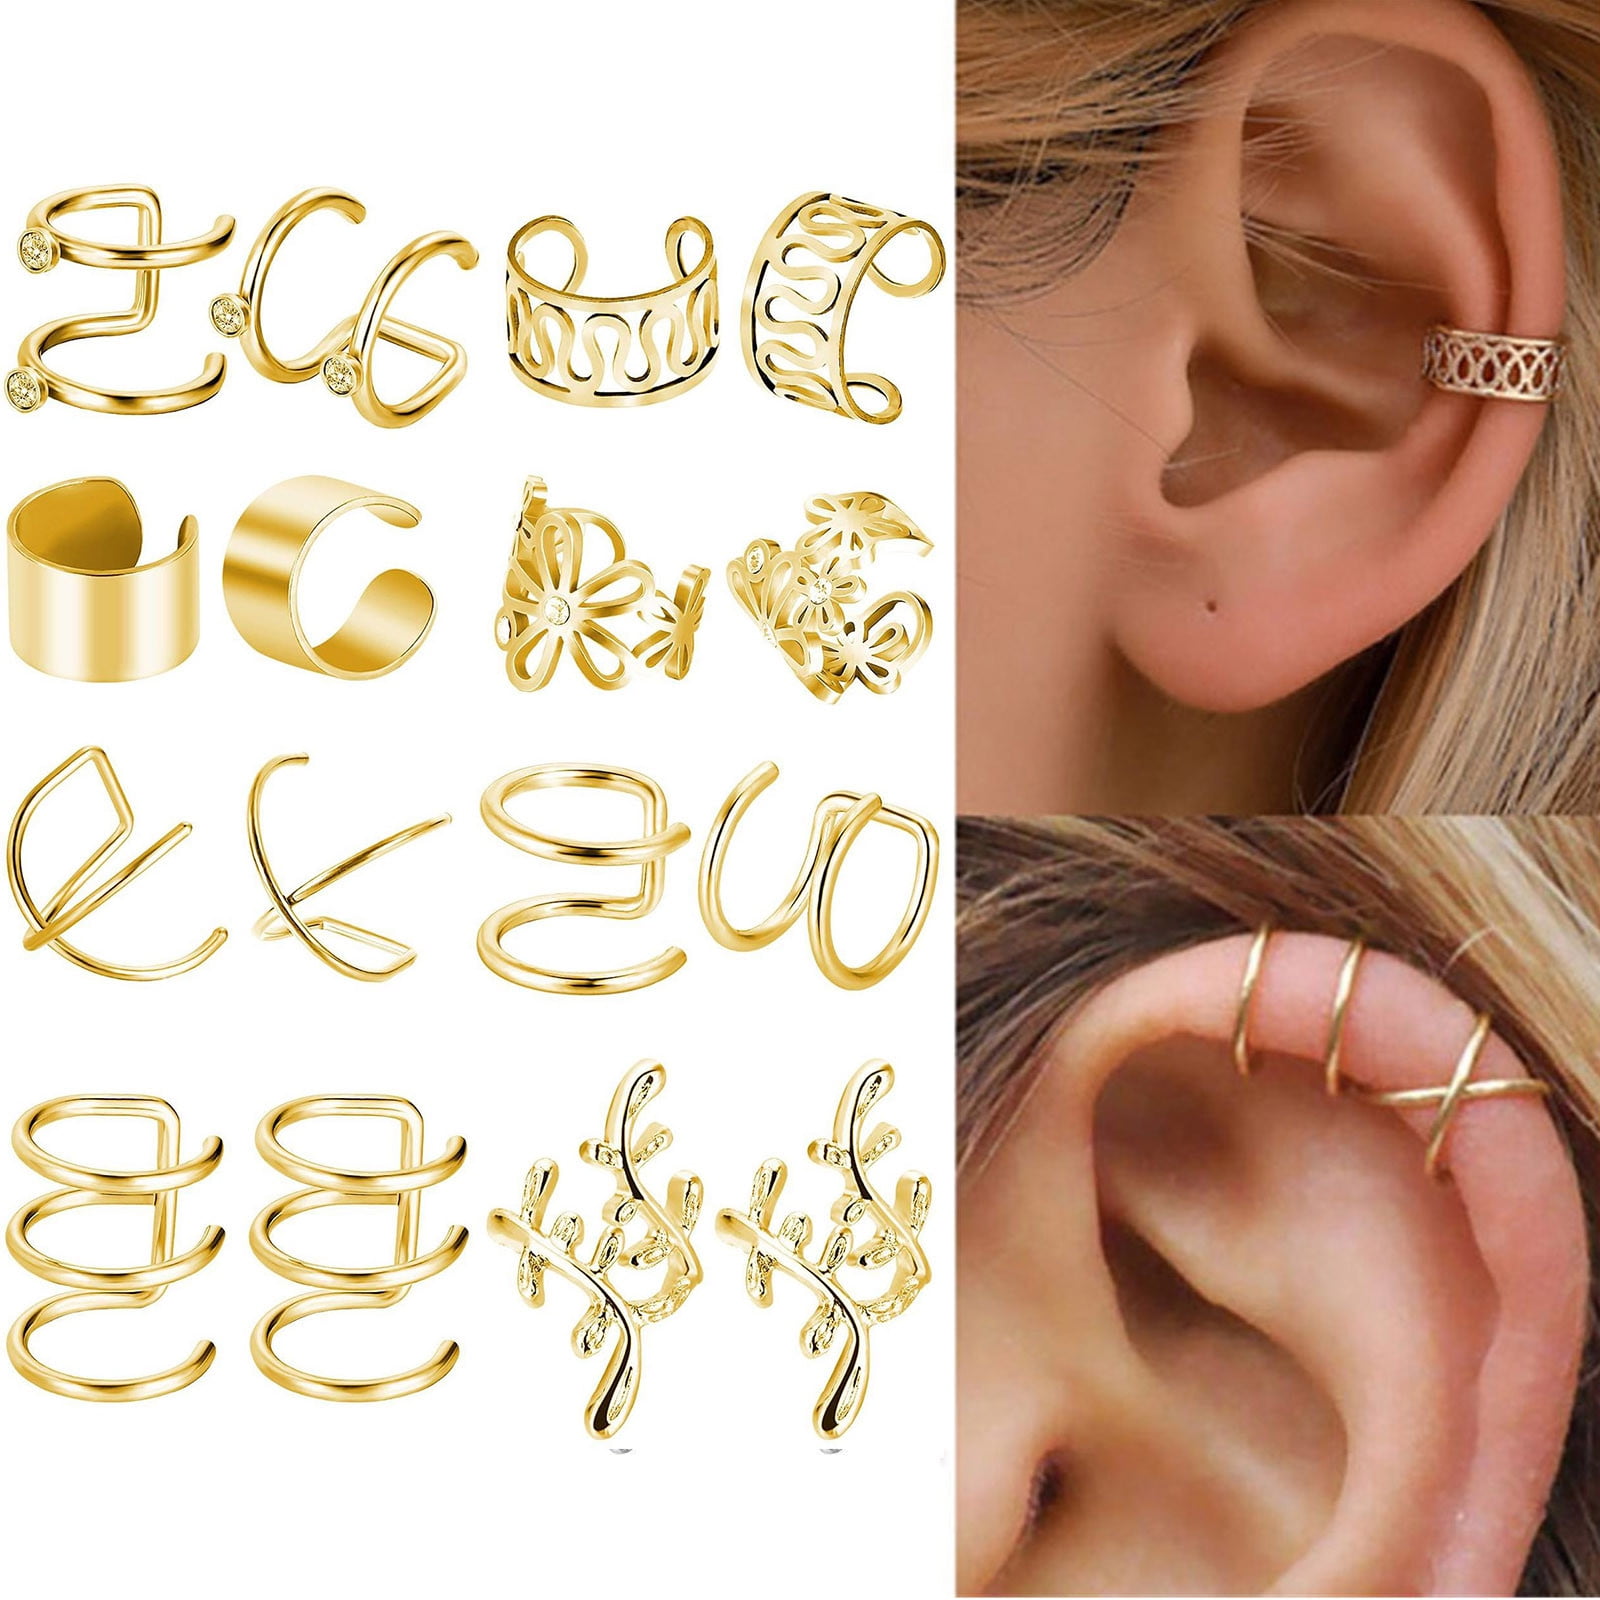 Buy Elegant Gold Long Chain Invisible Clip on Earrings for Non-pierced Ears-non  Pierced Earrings for Sensitive Ears, Hypoallergenic Clip-ons Online in  India - Etsy